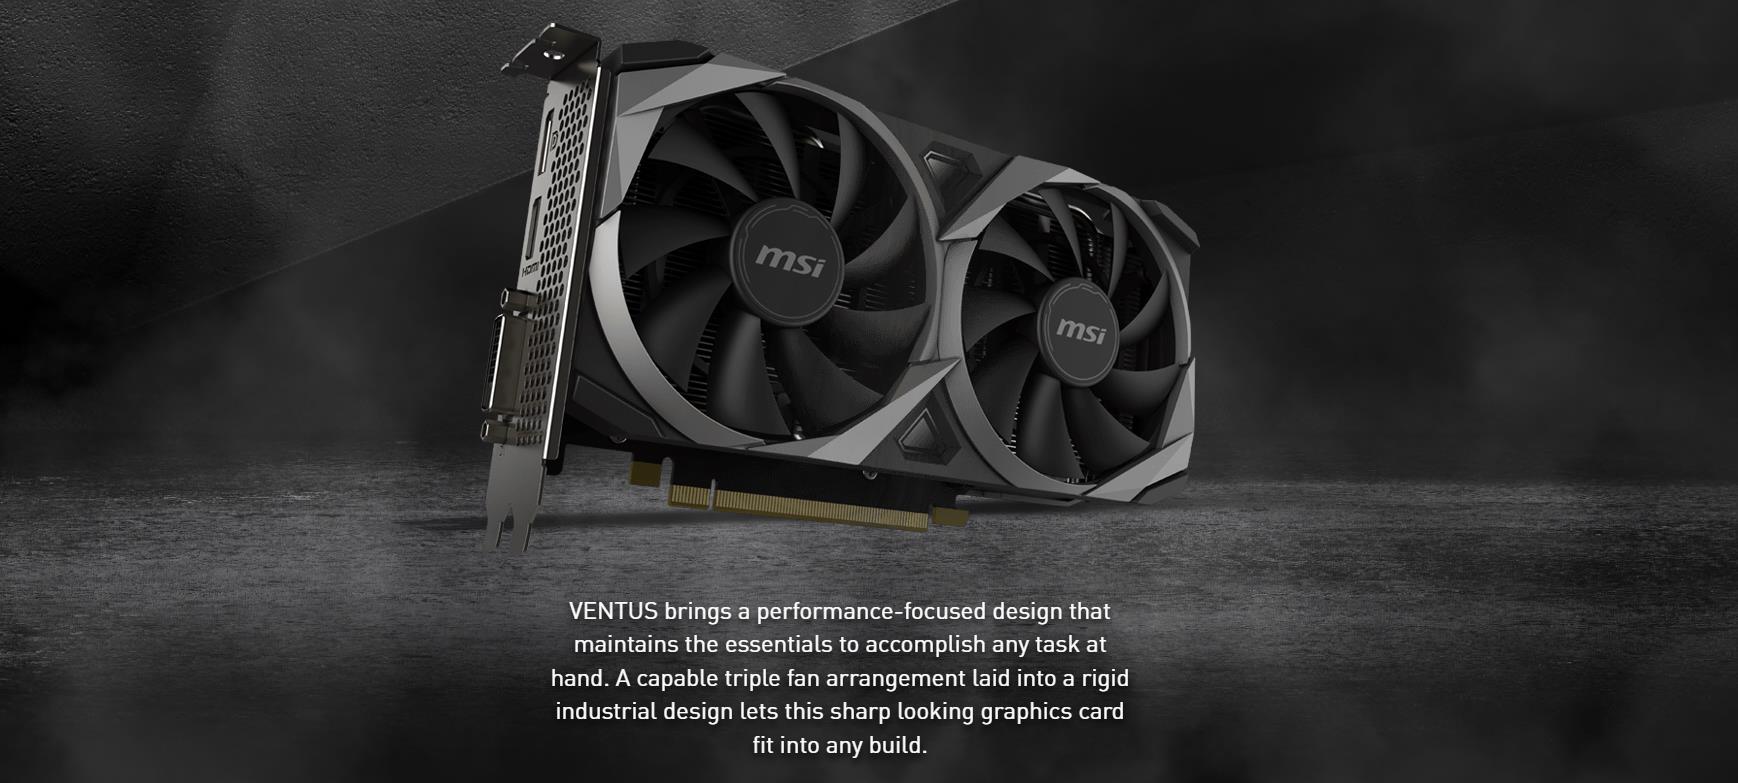 A large marketing image providing additional information about the product MSI GeForce RTX 3050 Ventus 2X XS OC 8G GDDR6 - Additional alt info not provided